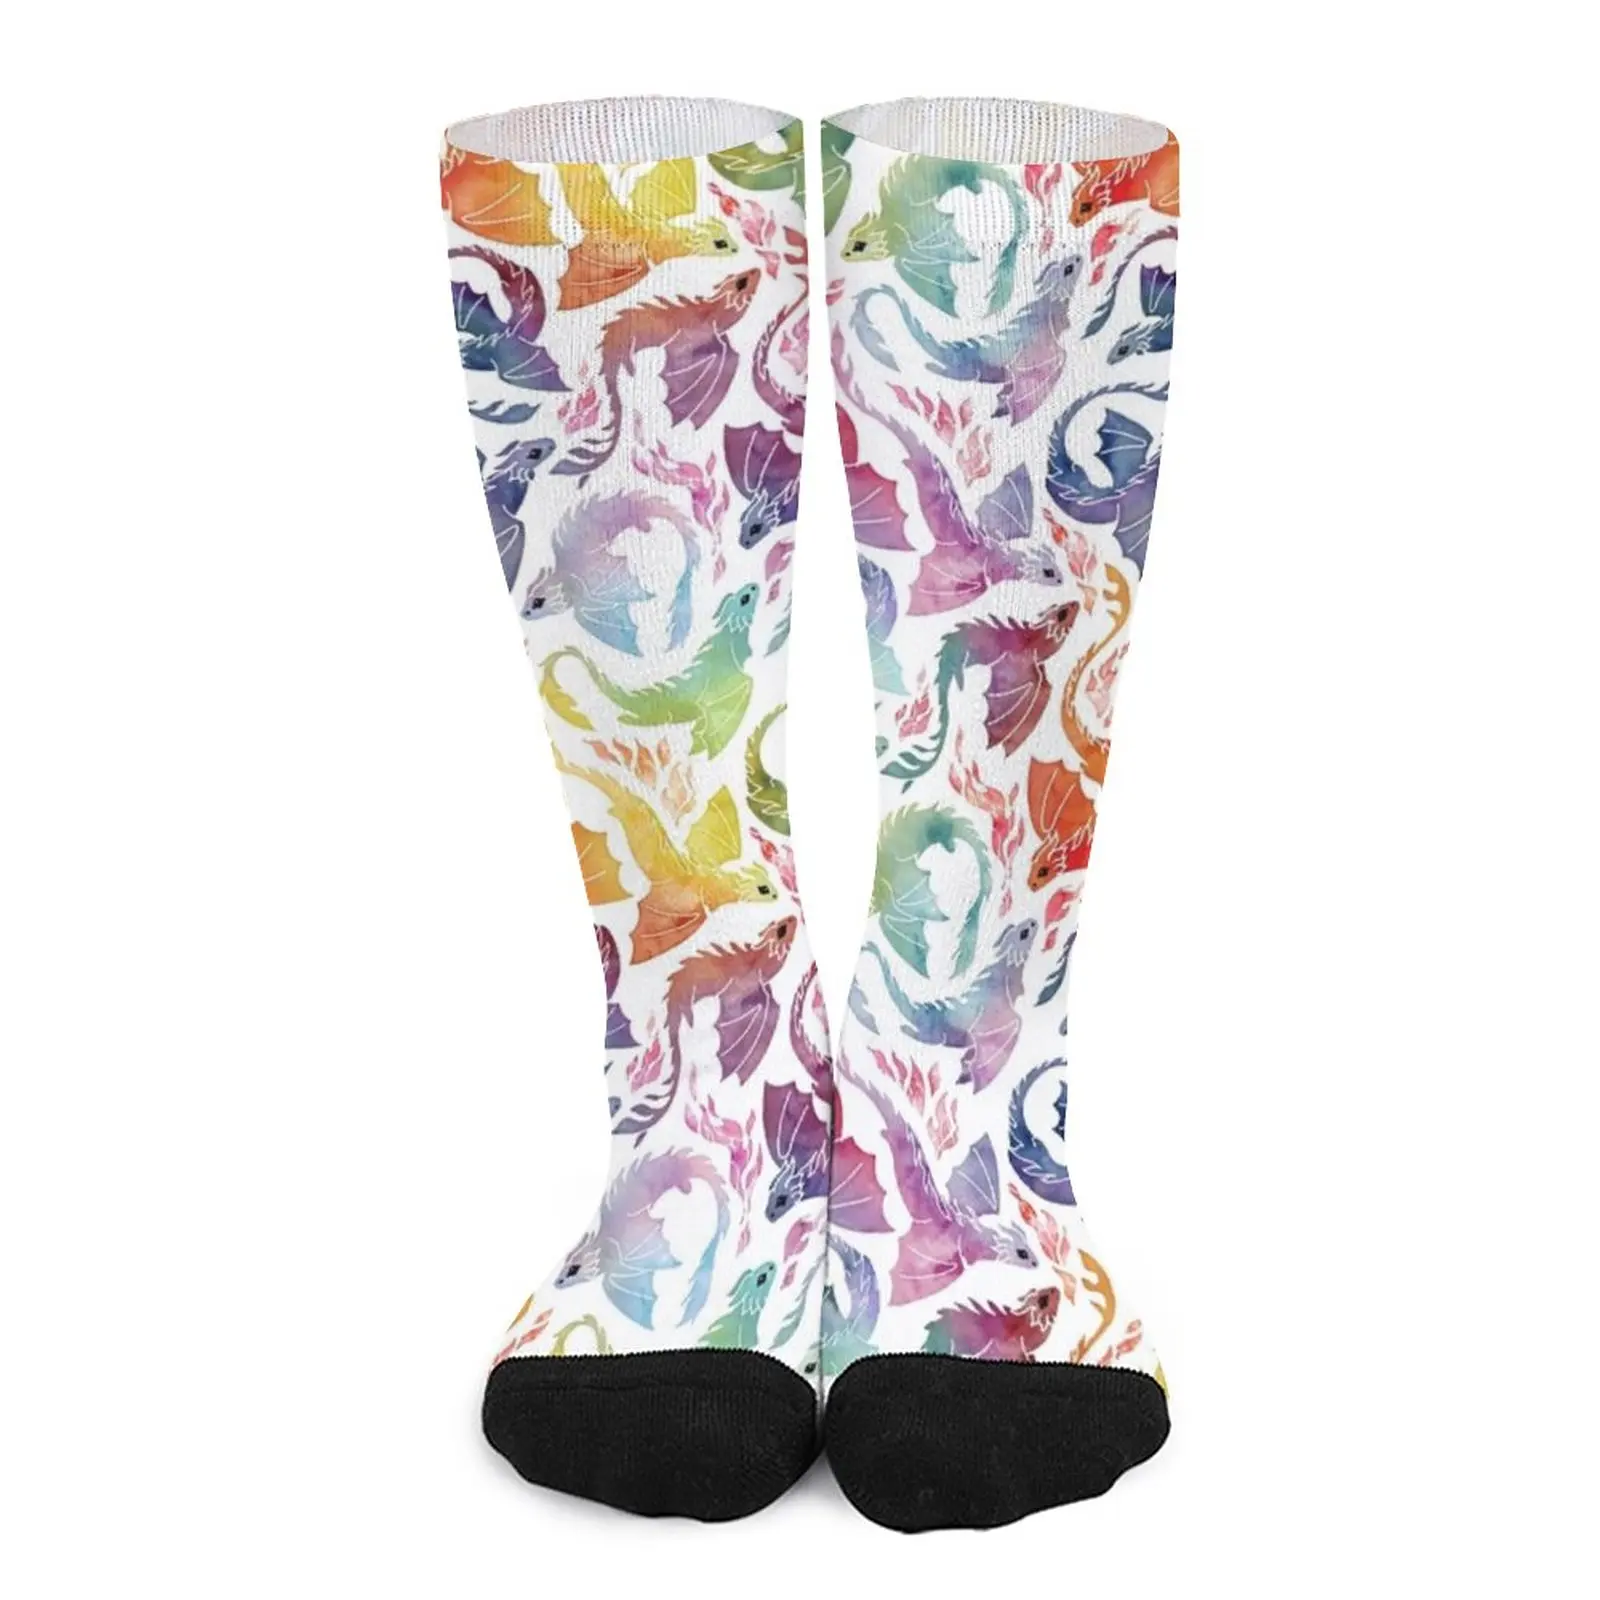 Dragon fire rainbow Socks custom socks funny socks for Women valentines day gift for boyfriend shoes a feast for crows a song of ice and fire 4